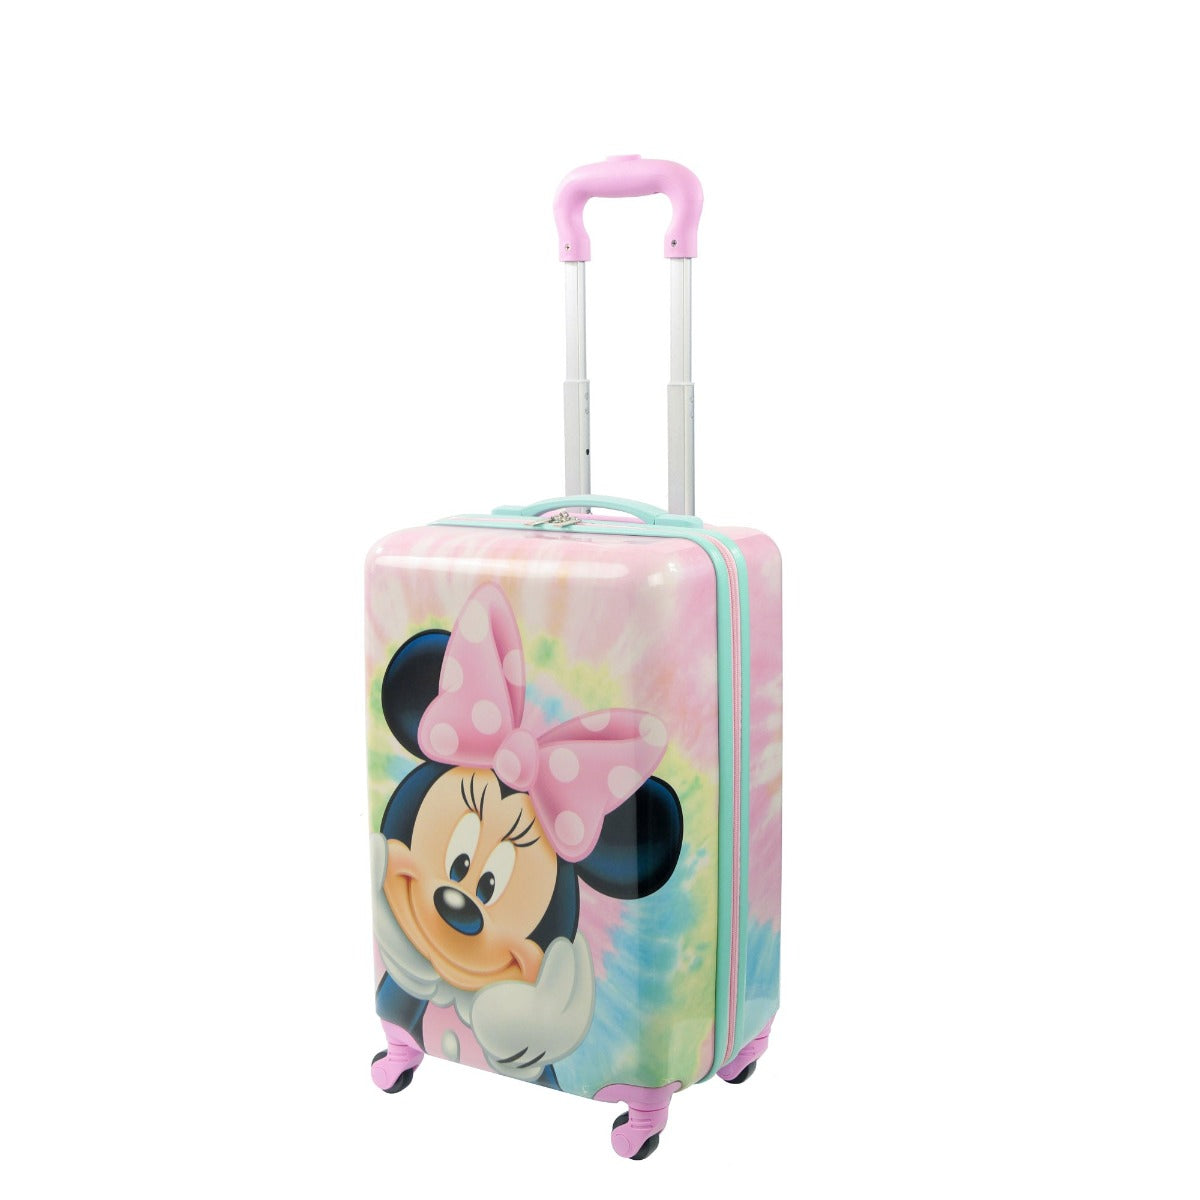 Disney minnie mouse tye dye kids 21" spinner suitcase hardside luggage - best kids carry on suitcases for travel